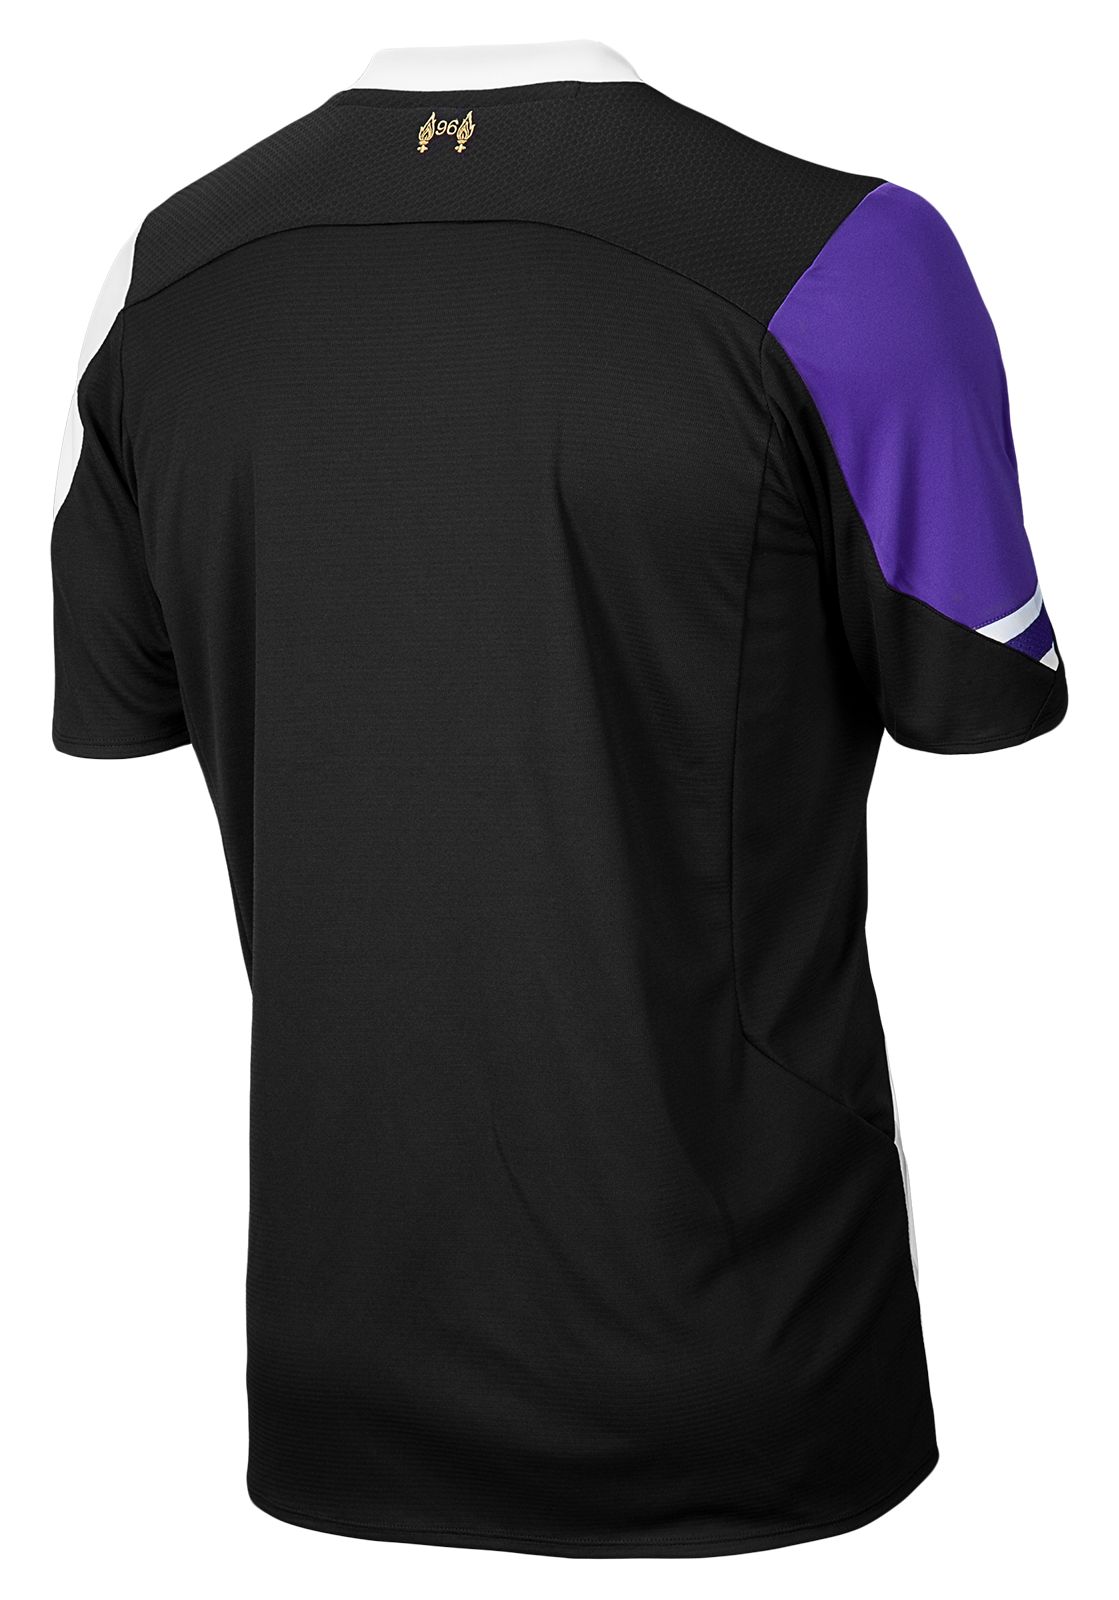 Liverpool 3rd Short Sleeve Jersey 2013/14, Anthracite with Prism Violet & White image number 0